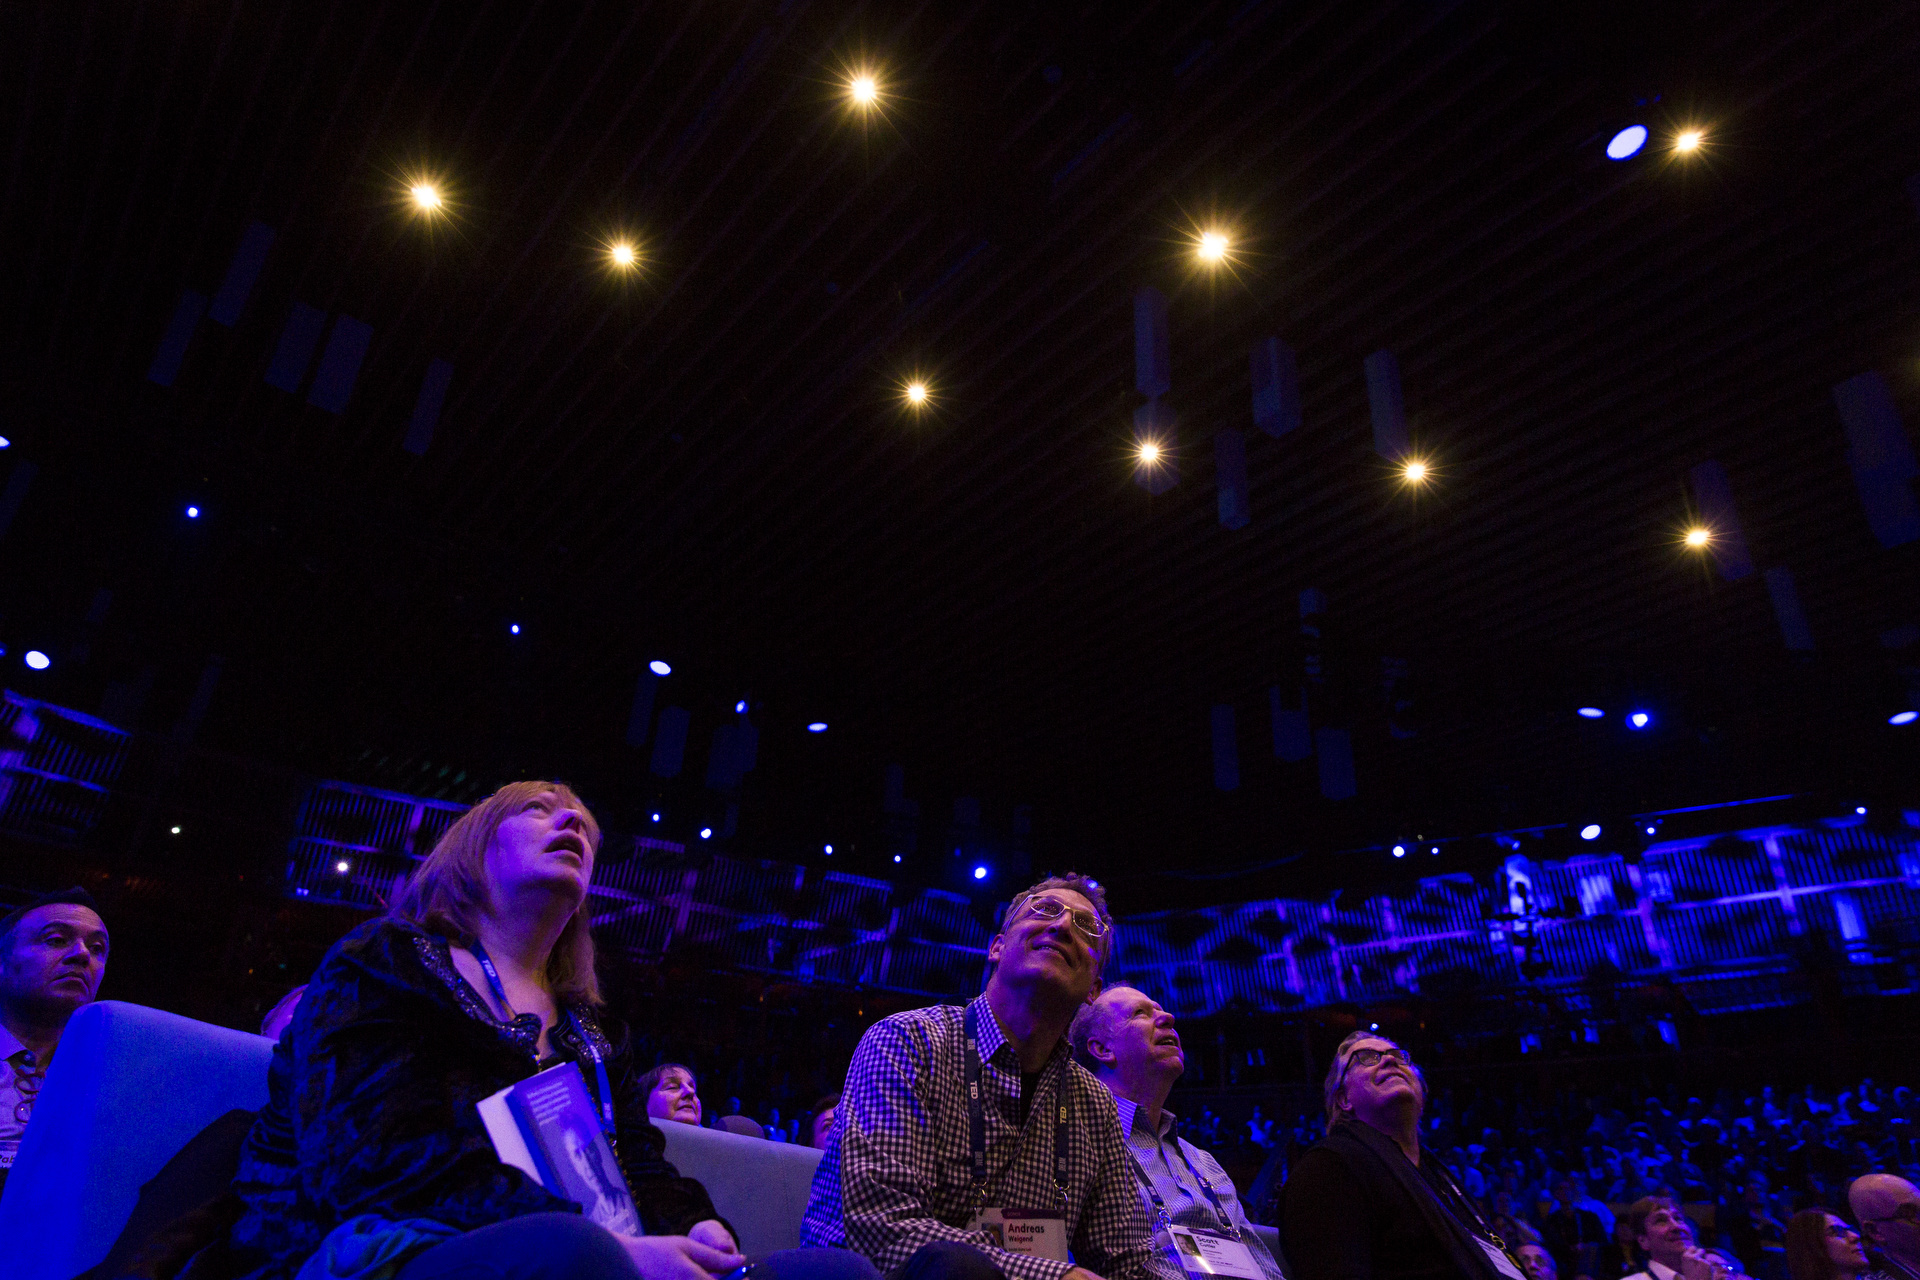 Attendees watch amazed as Raffaello D'Andrea's flying machines hover in swirls overhead. Photo: Bret Hartman / TED